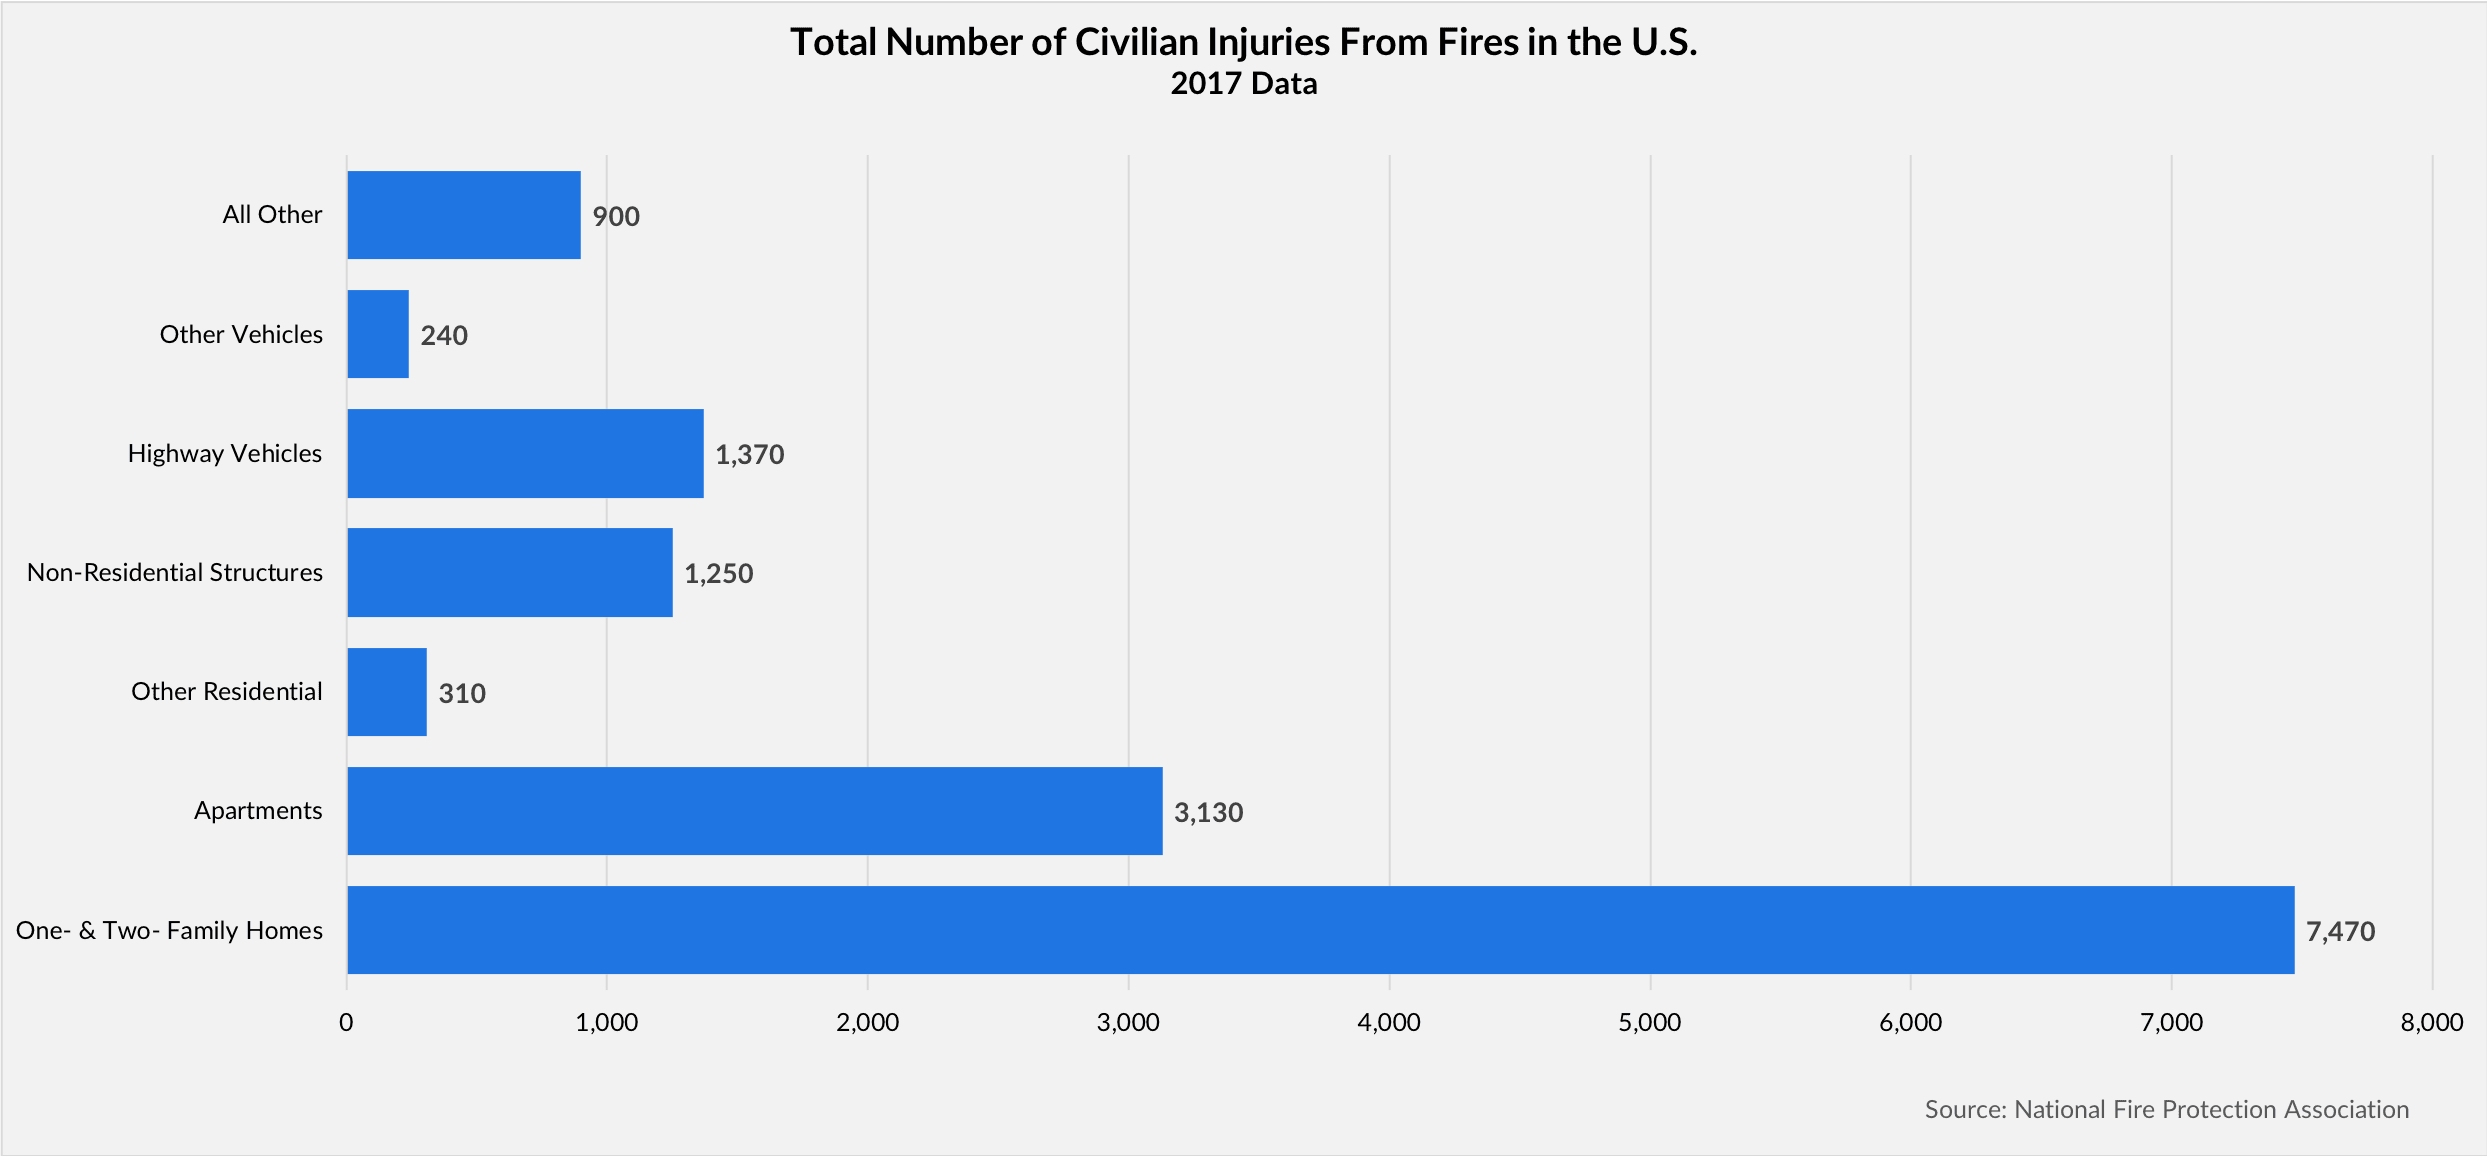 Total Number of Civilian Injuries from Fires in the U.S. chart